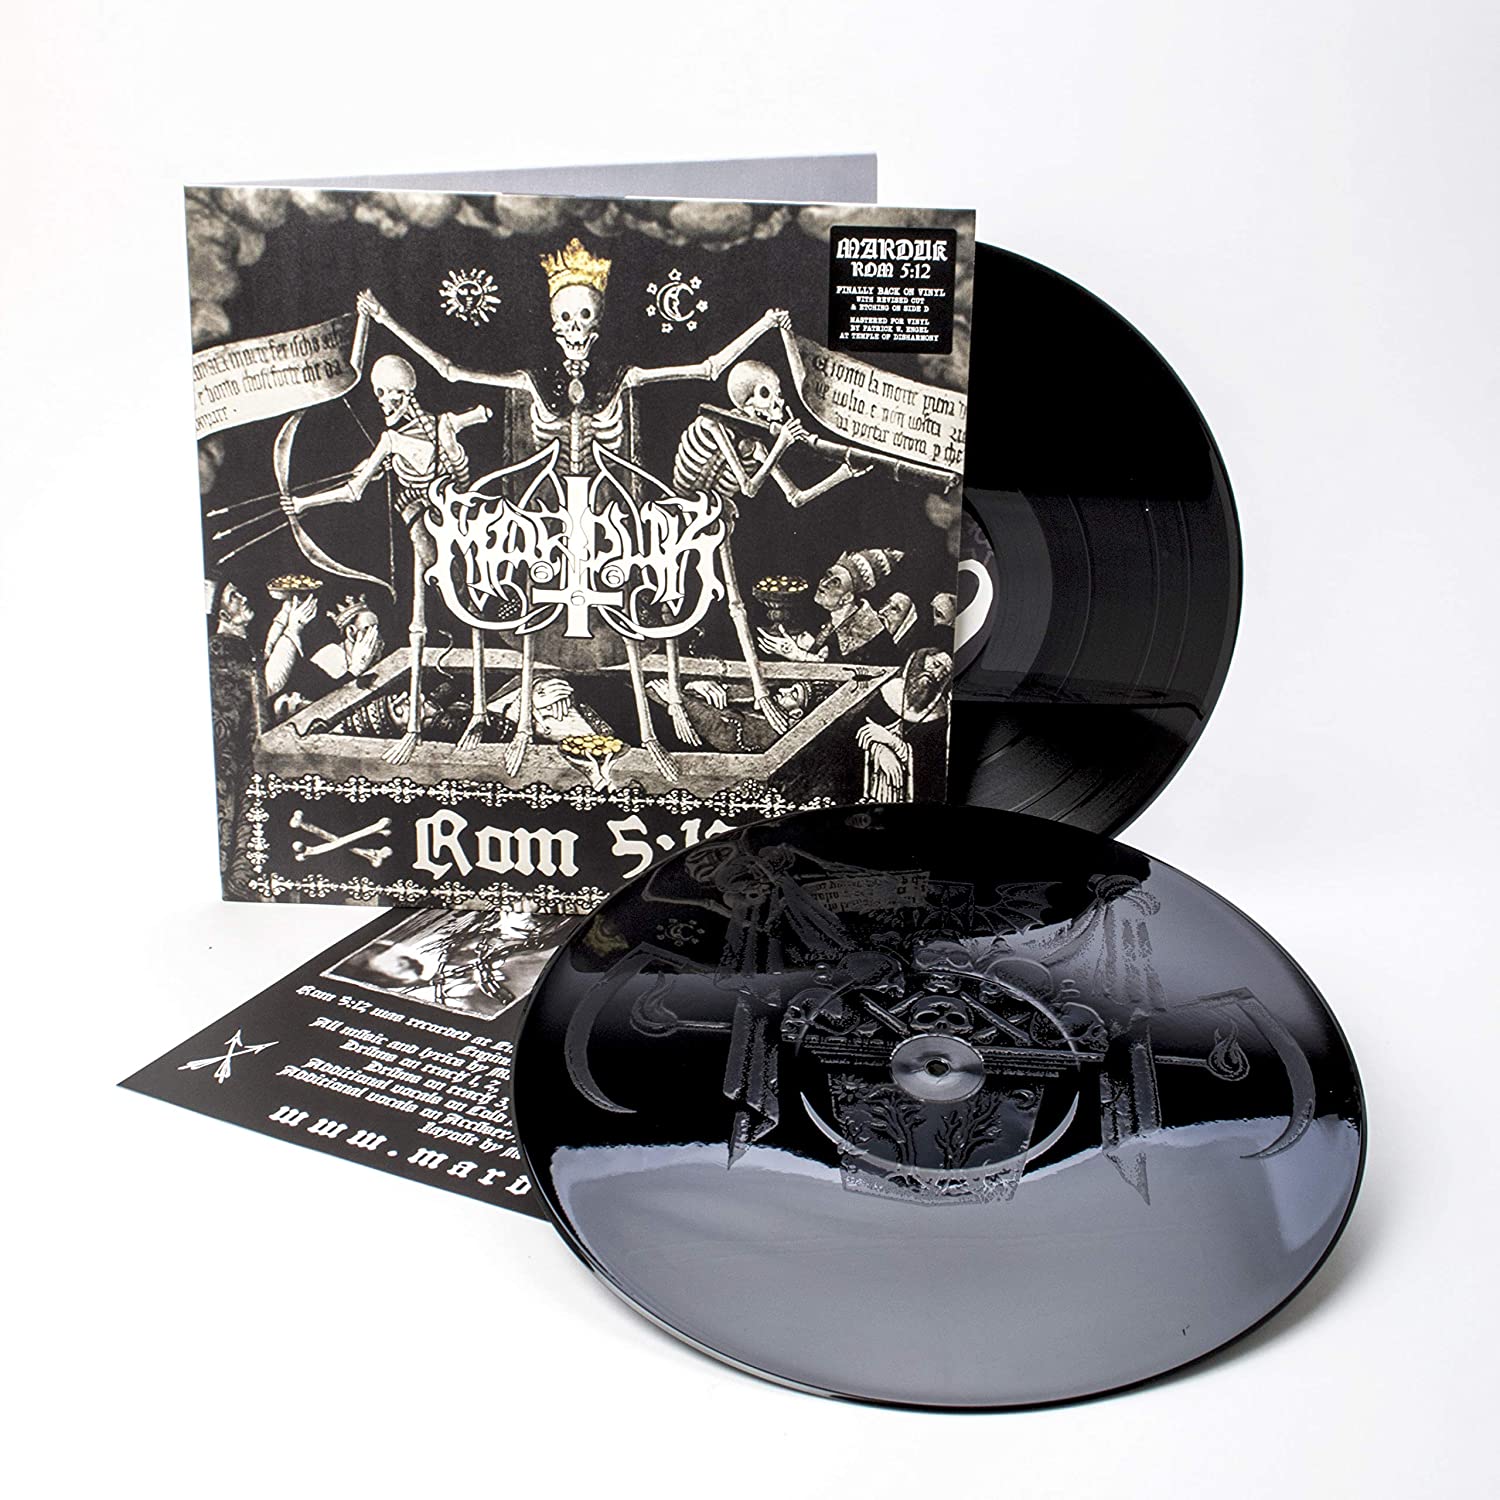 Marduk - Rom 5:12 180gm gatefold 2LP with etched side D